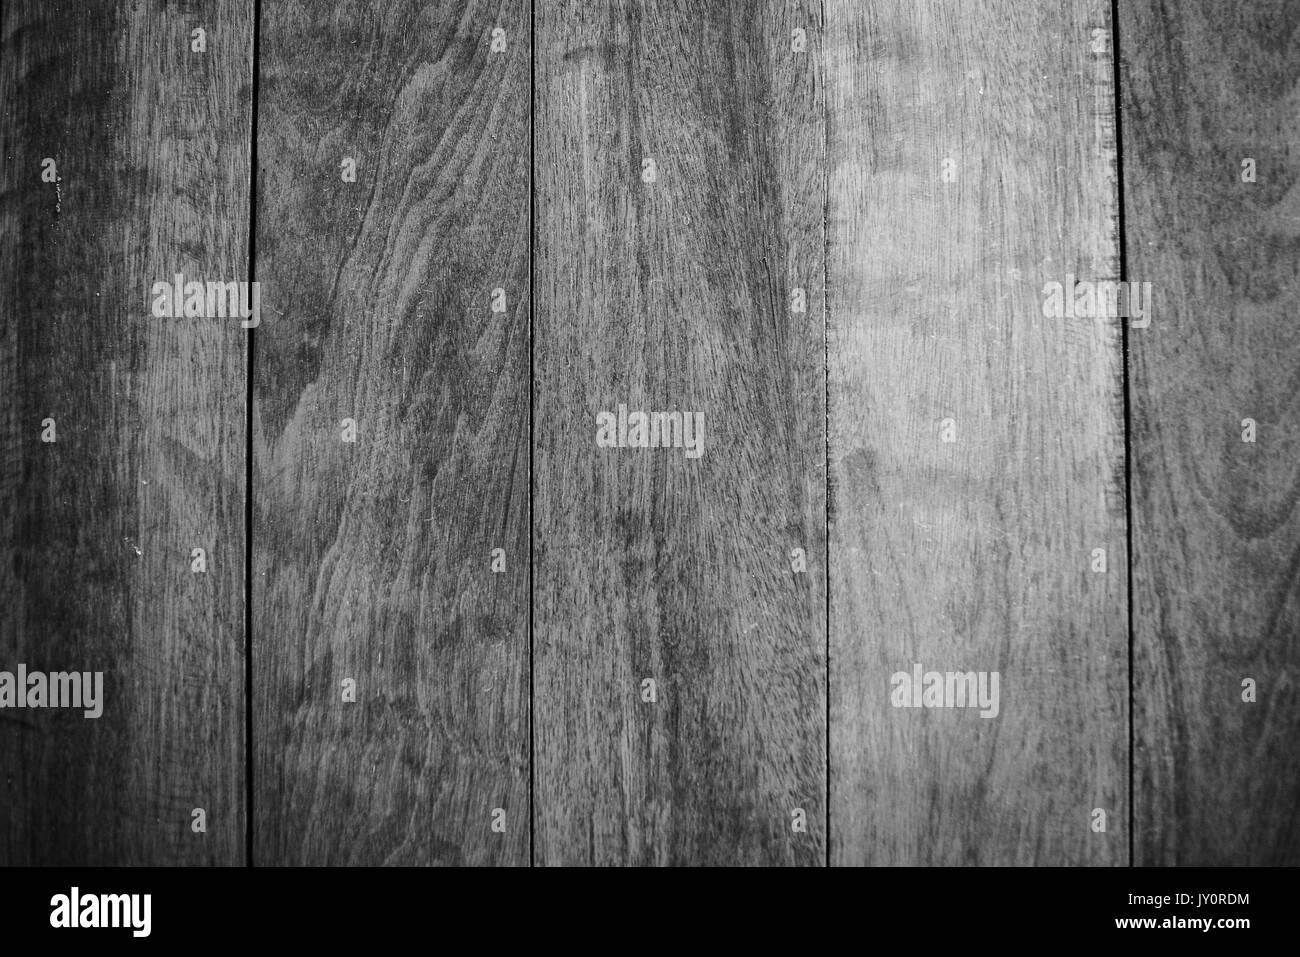 Black and white wooden texture background.Rough wood texture in vertical.Vintage wood texture. Stock Photo